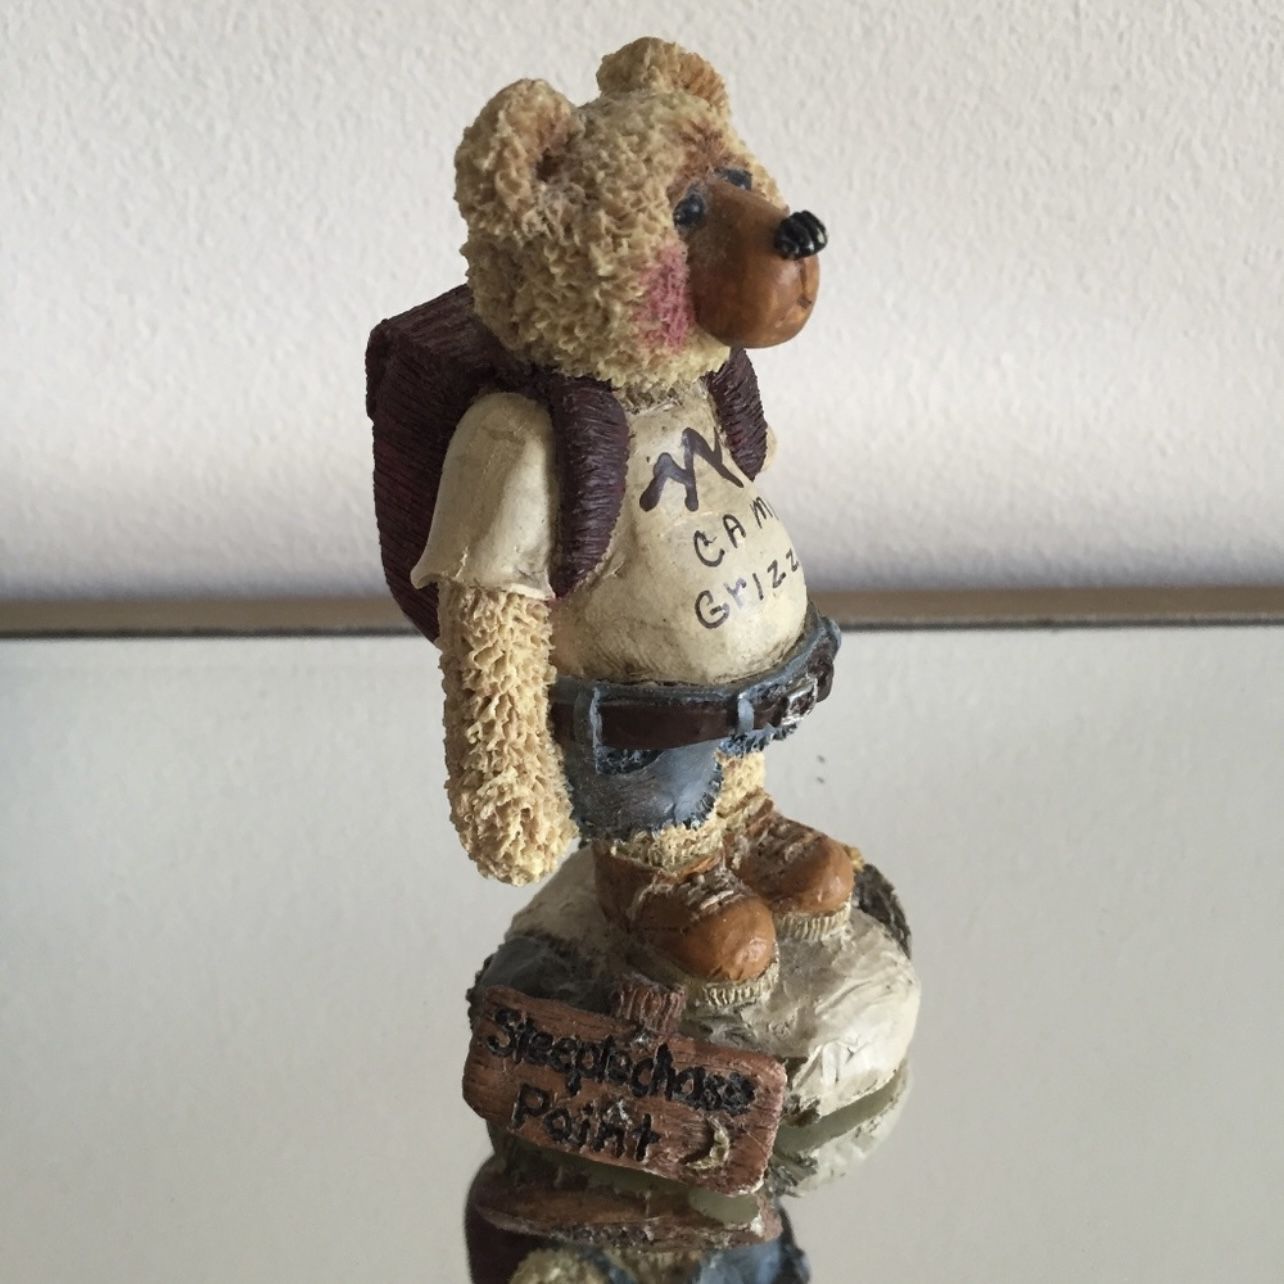 SHELLY BEARS & CO. 1996 Camp Grizzly Animal Bear Camper Figurine